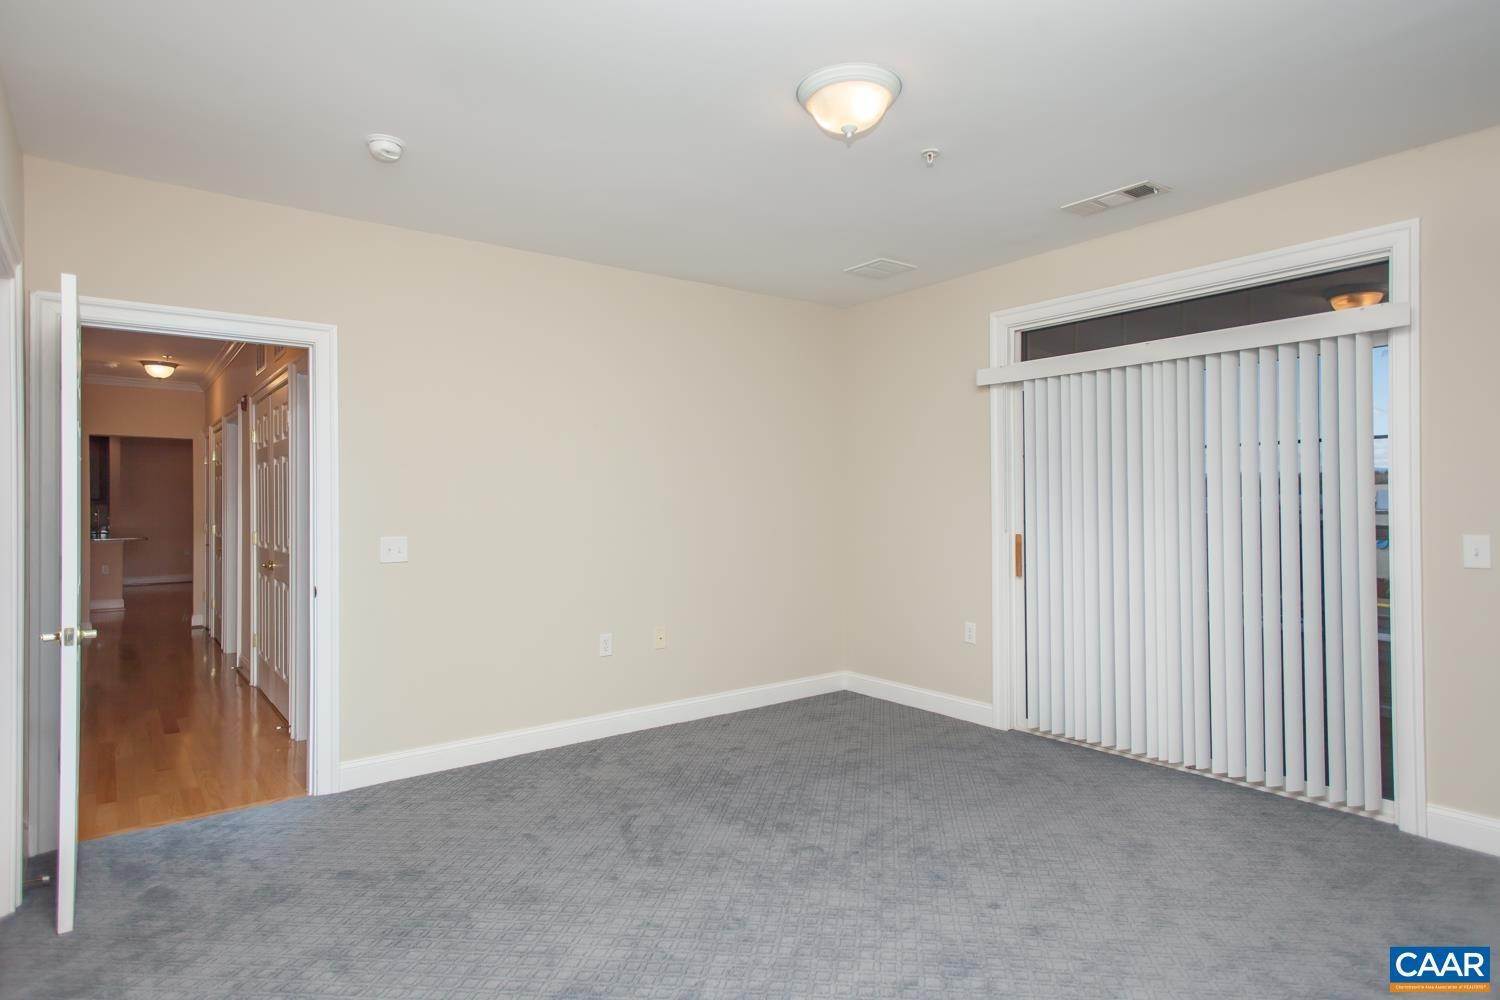 21. Condominiums for Sale at 1051 GLENWOOD STATION LN #304 Charlottesville, Virginia 22901 United States